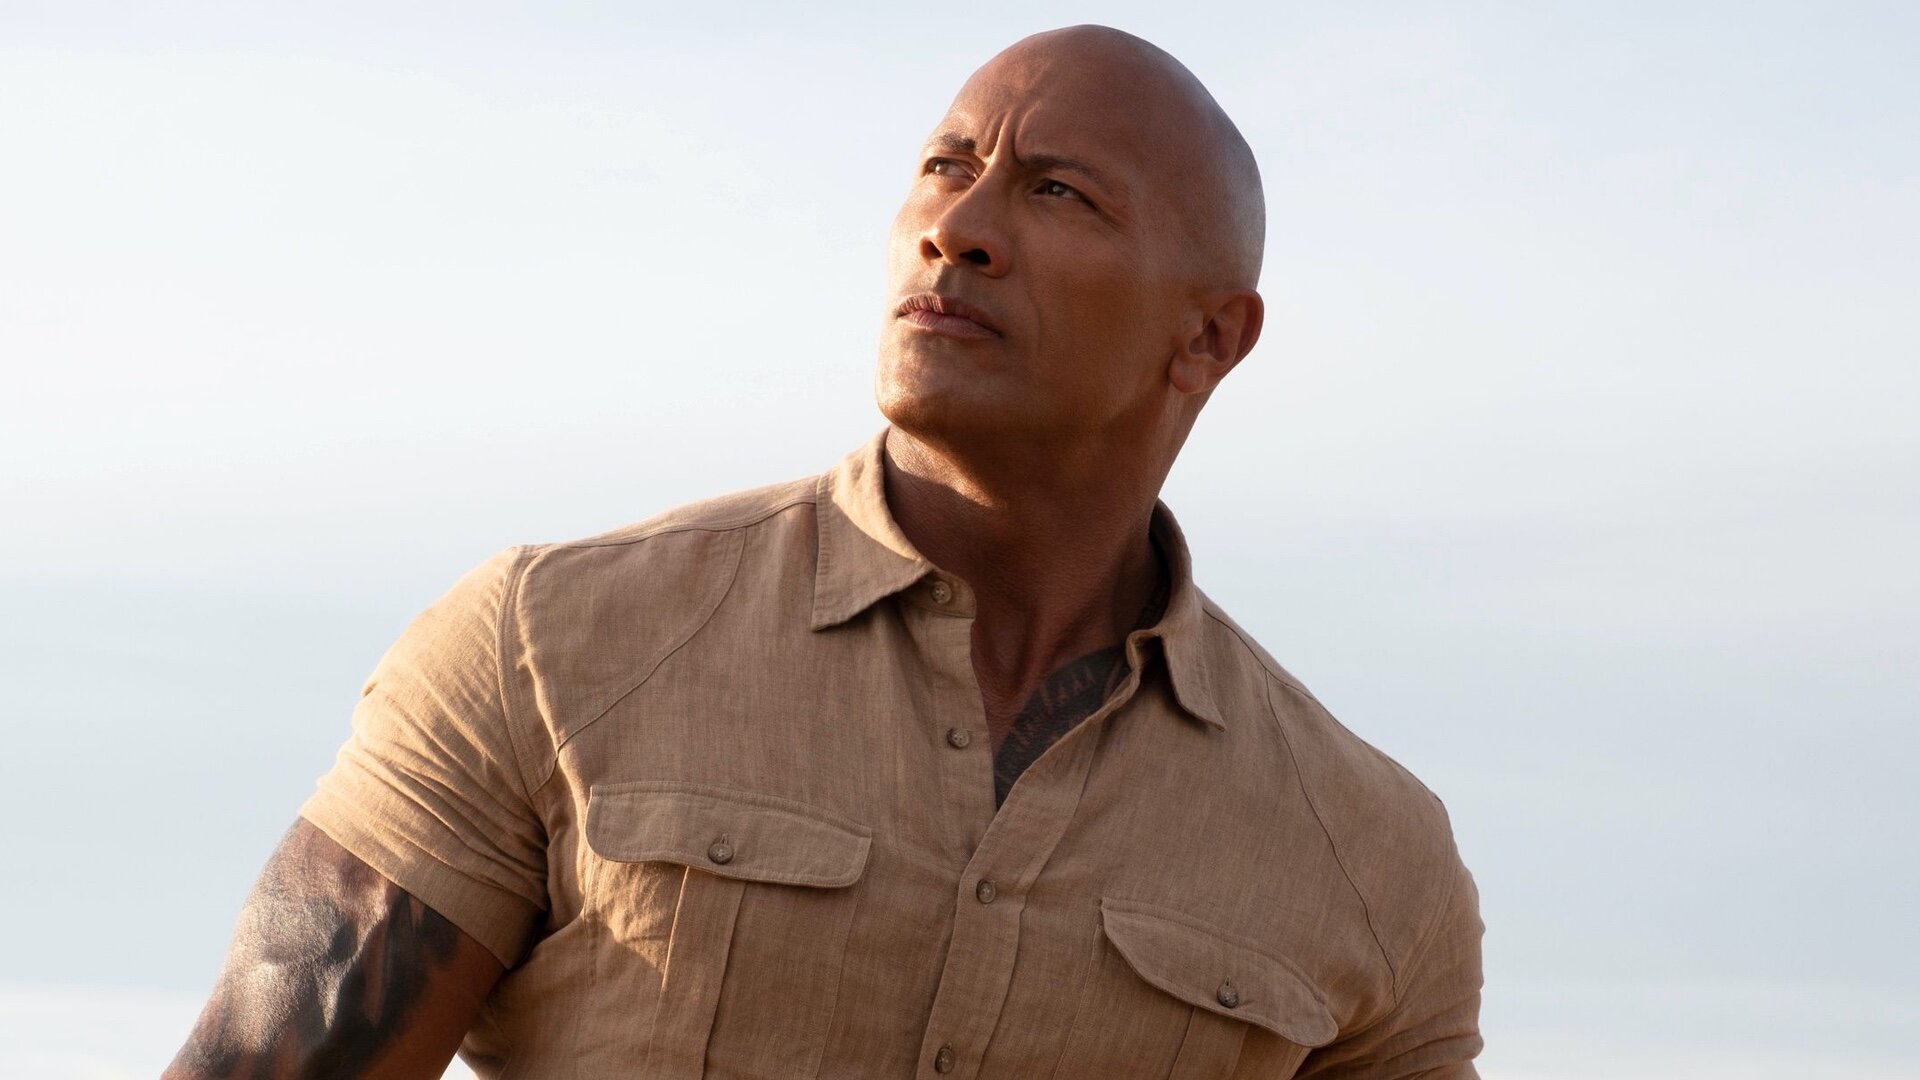 Dwayne Johnson Shares Amusing Pitch Video for His Upcoming YOUNG ROCK ...